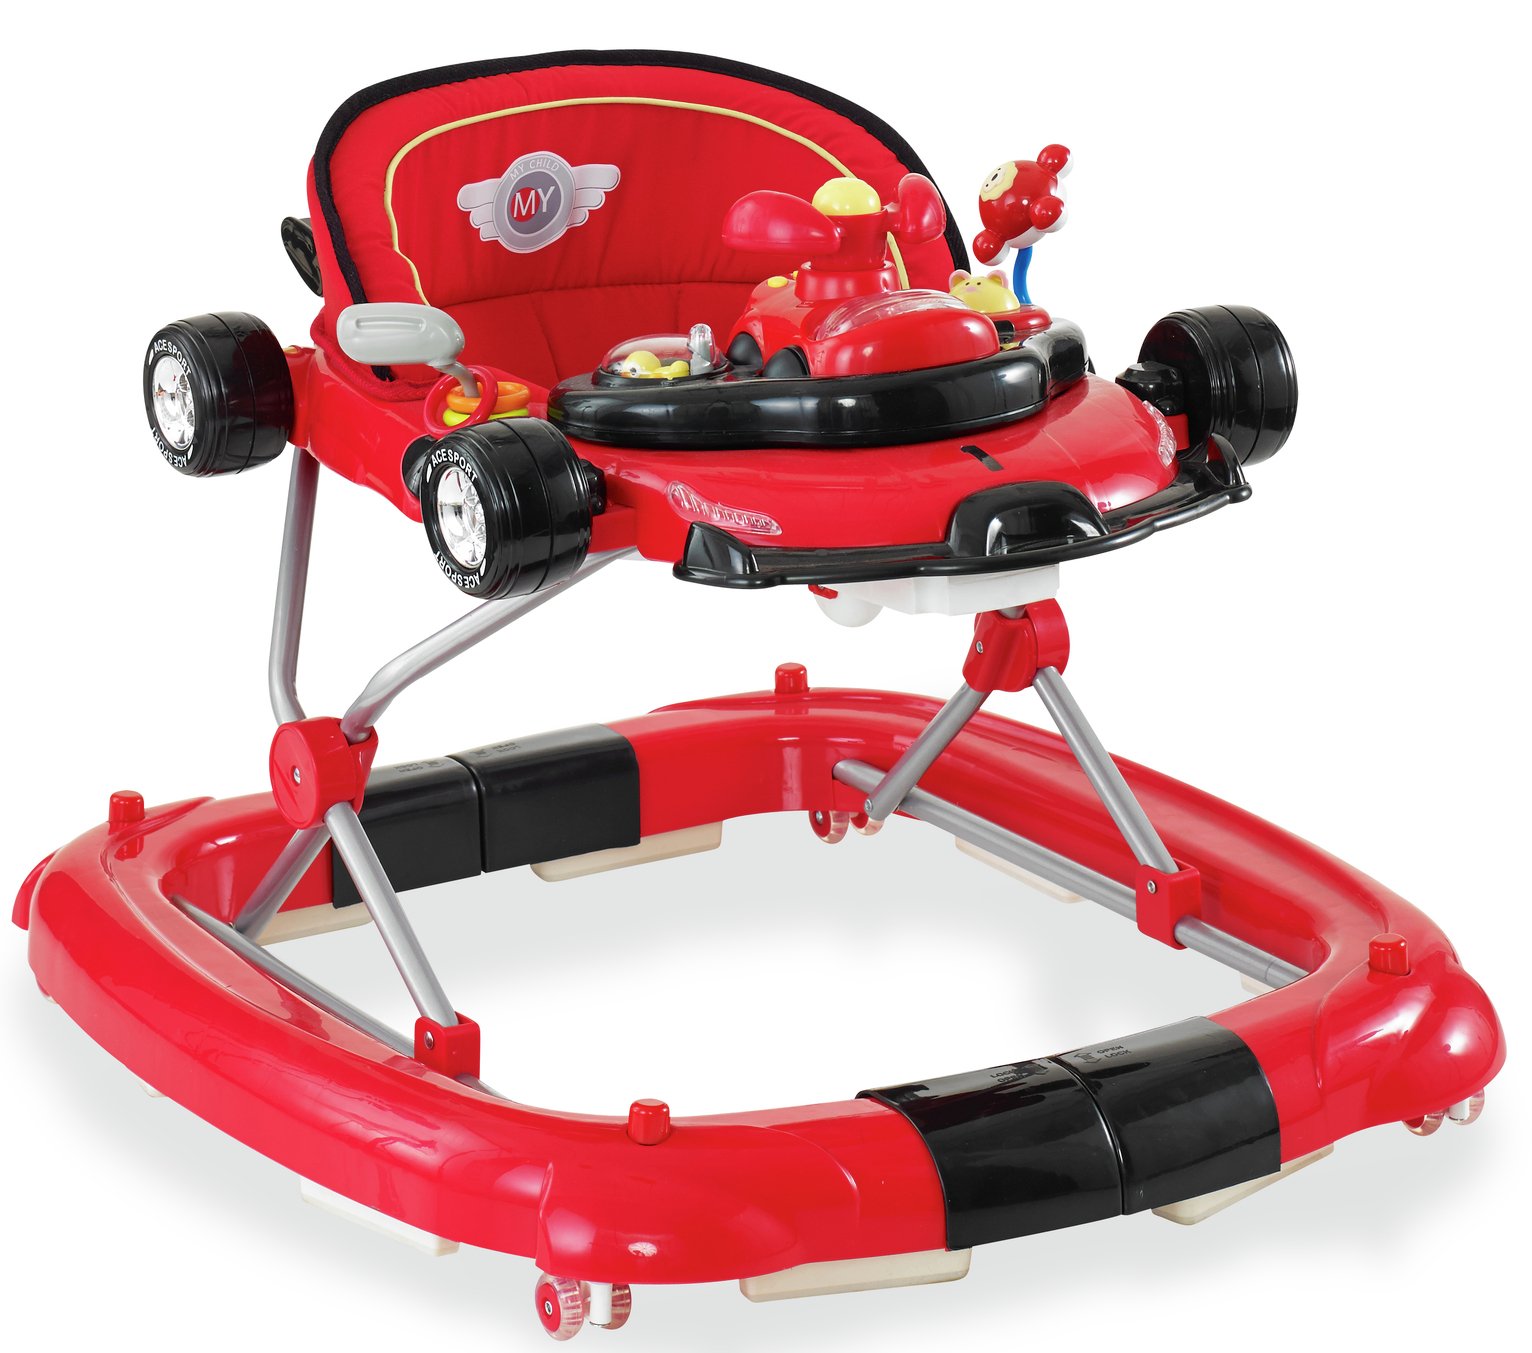 Mychild F1 2 in1 Car Walker Racing Red Review